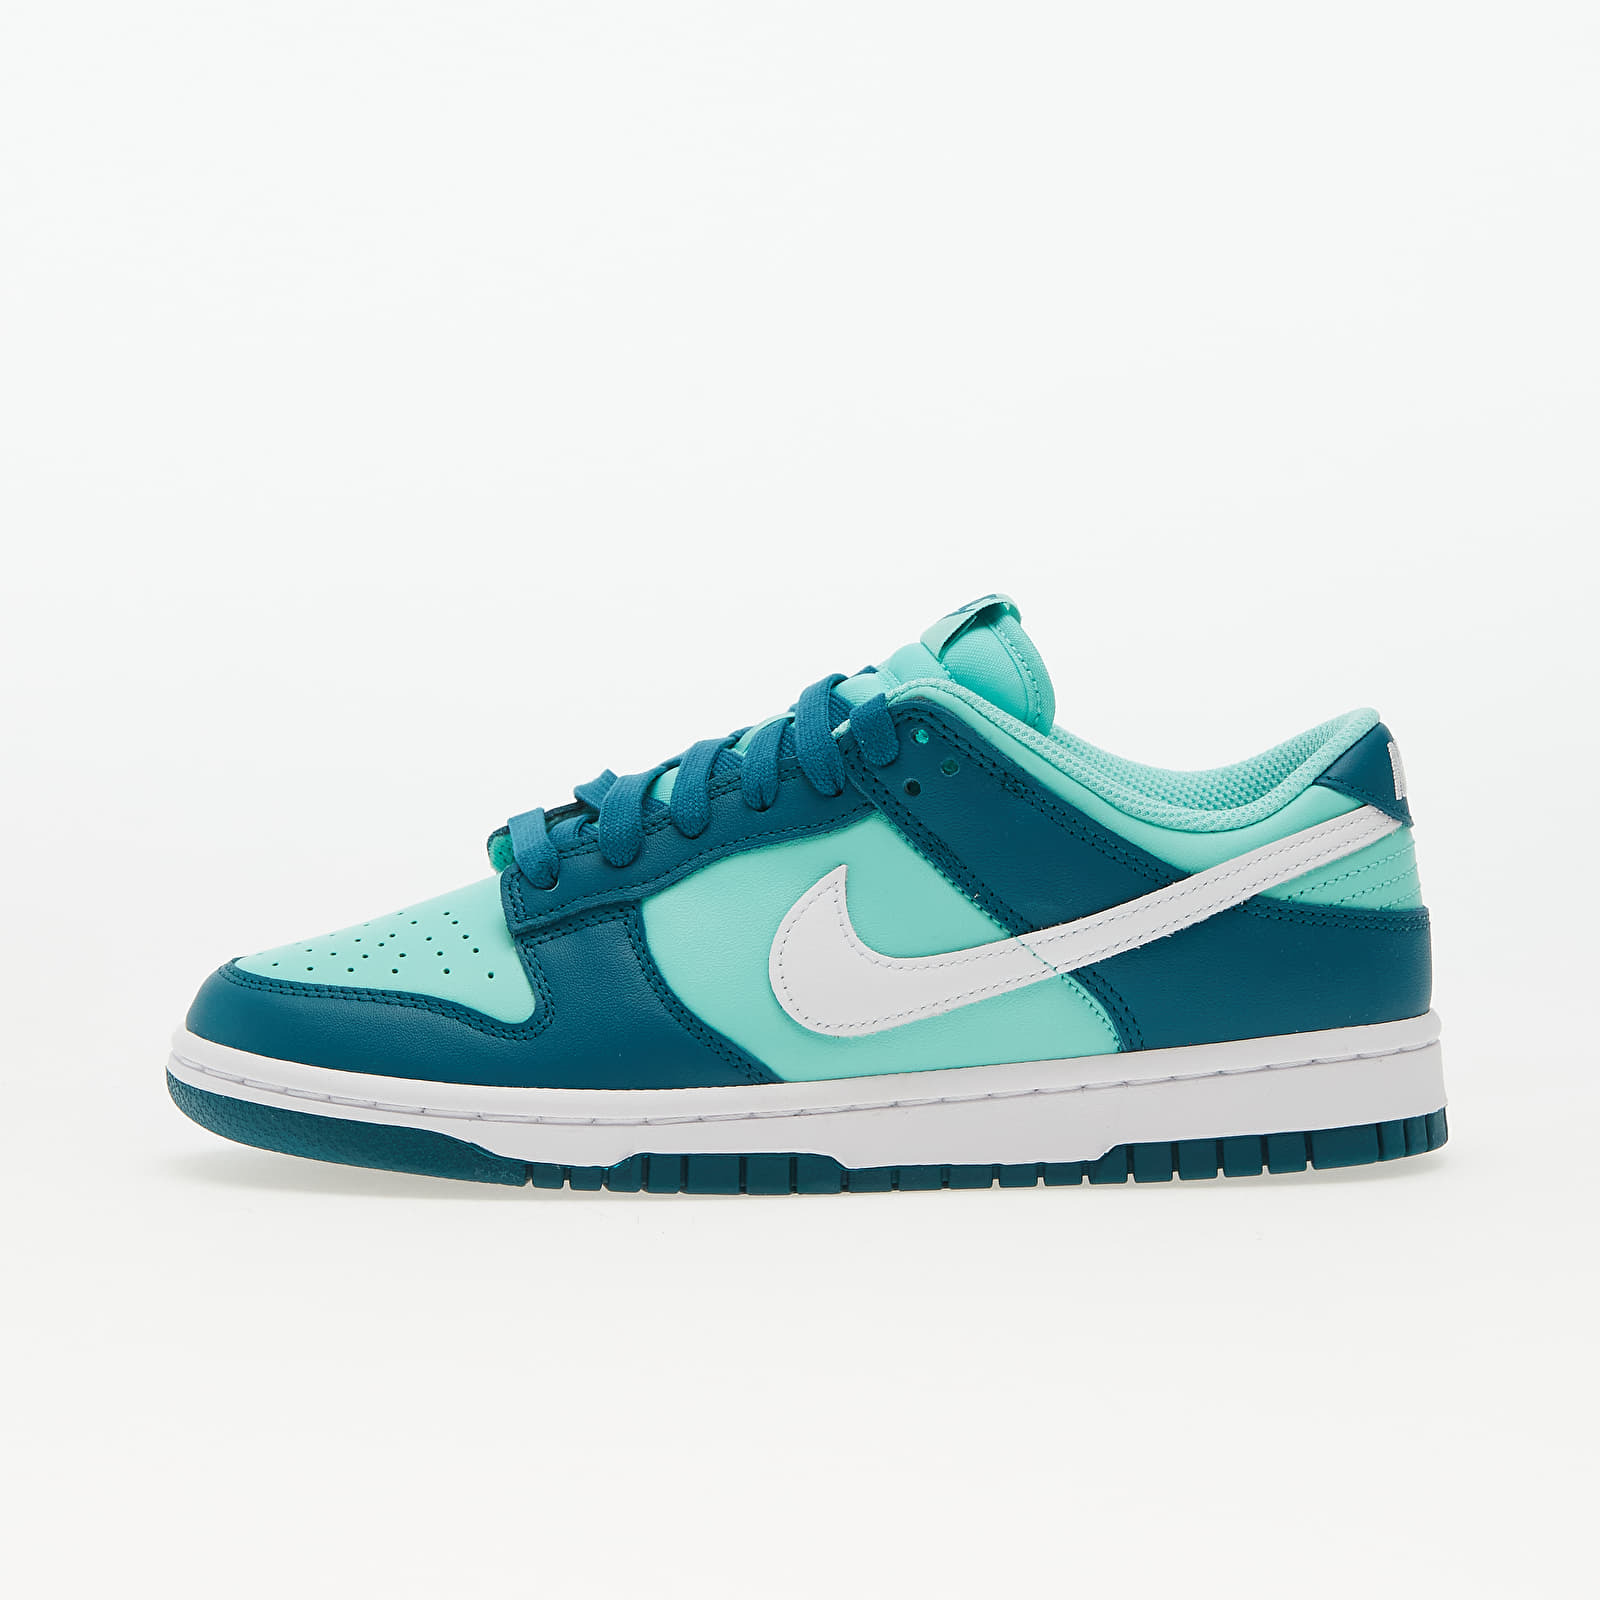 Nike - w dunk low geode teal/ white-emerald rise